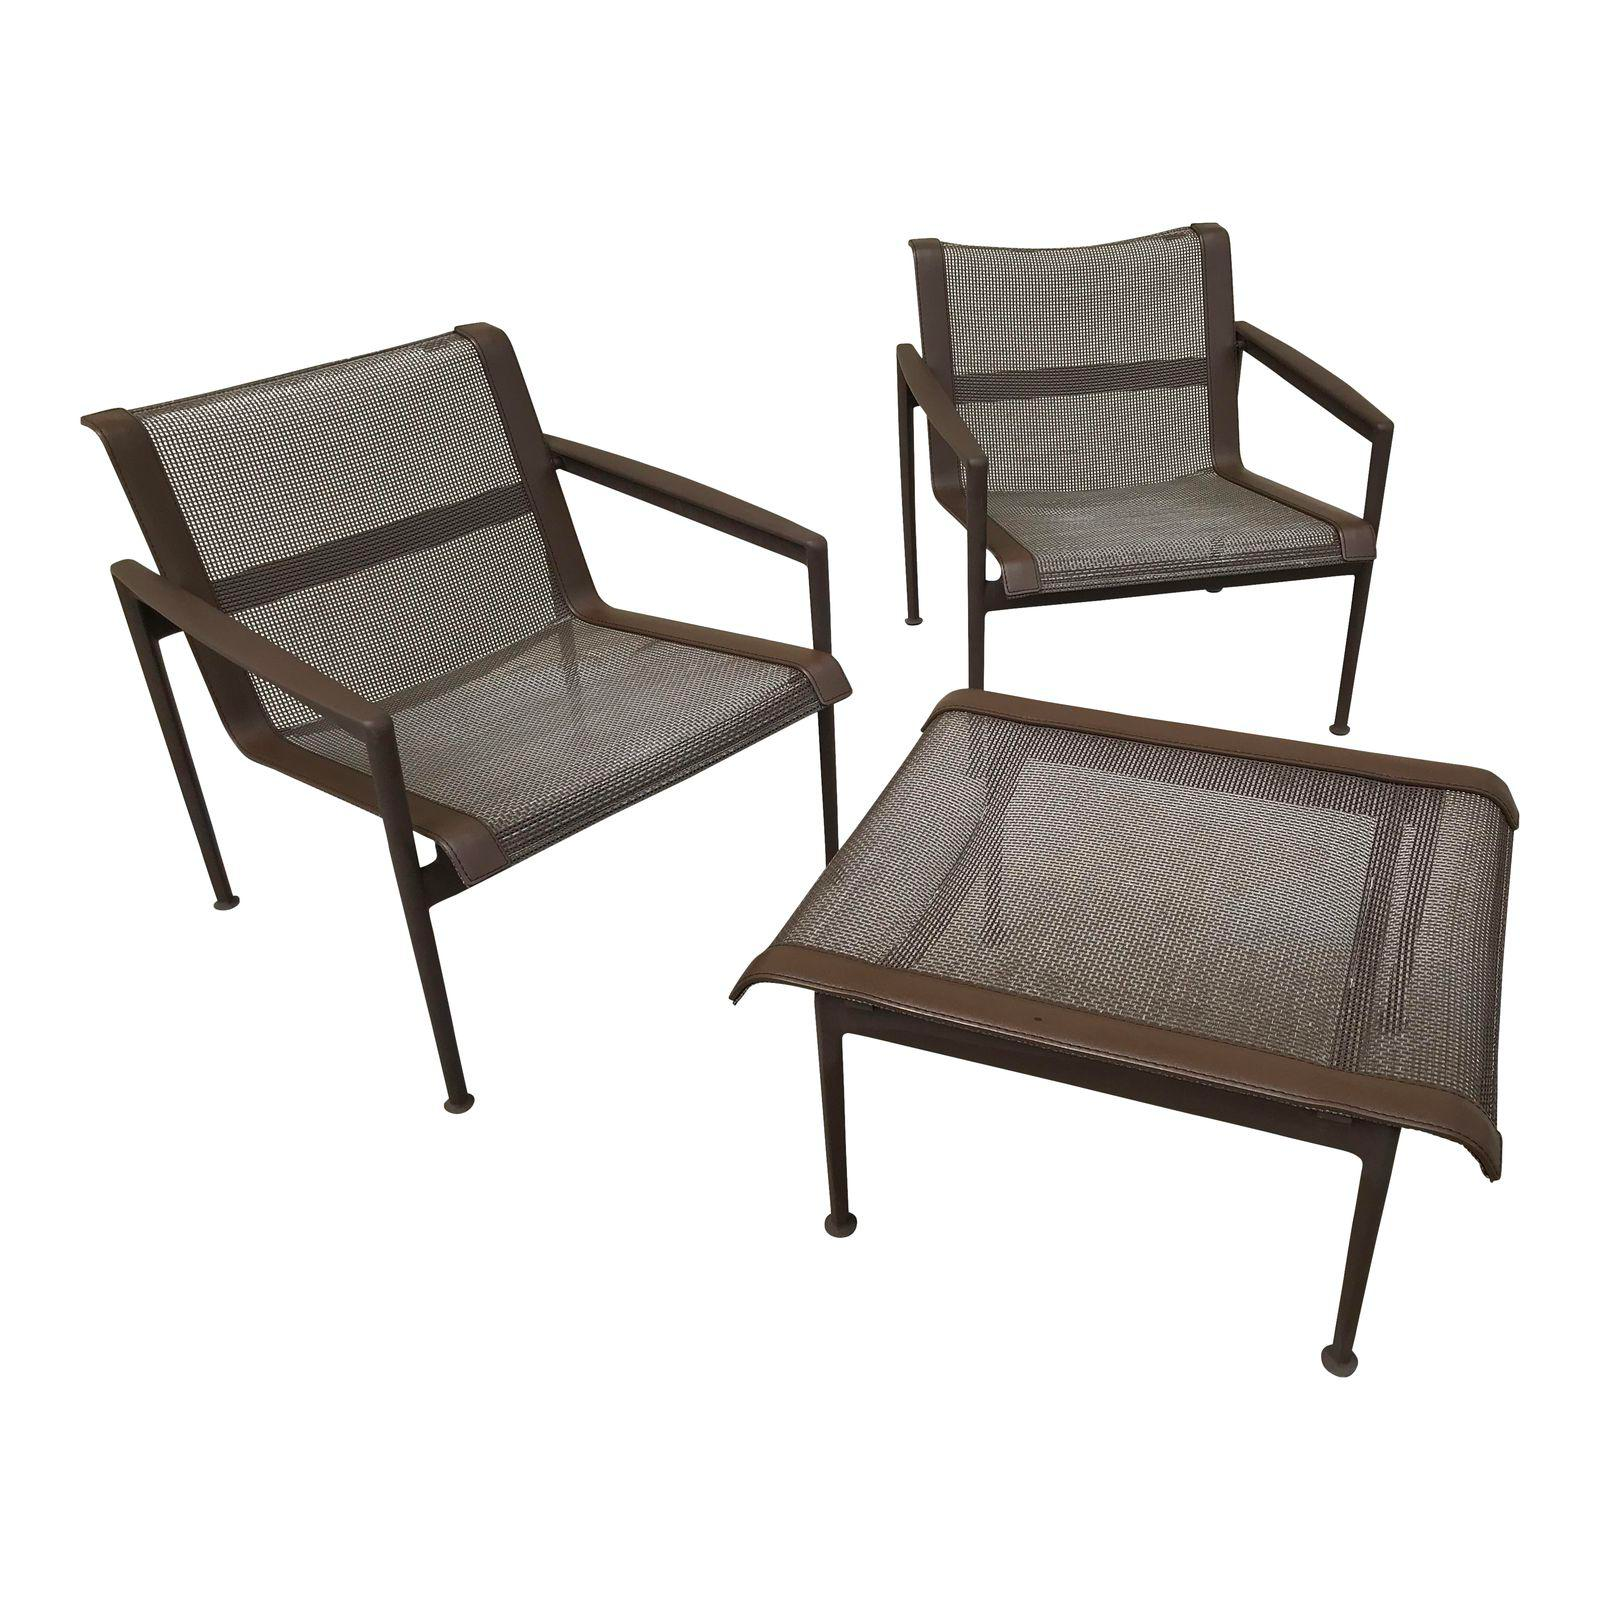 1966 Mid-Century Modern Richard Schultz for Knoll Lounge Chairs and Ottoman - 3 Pieces